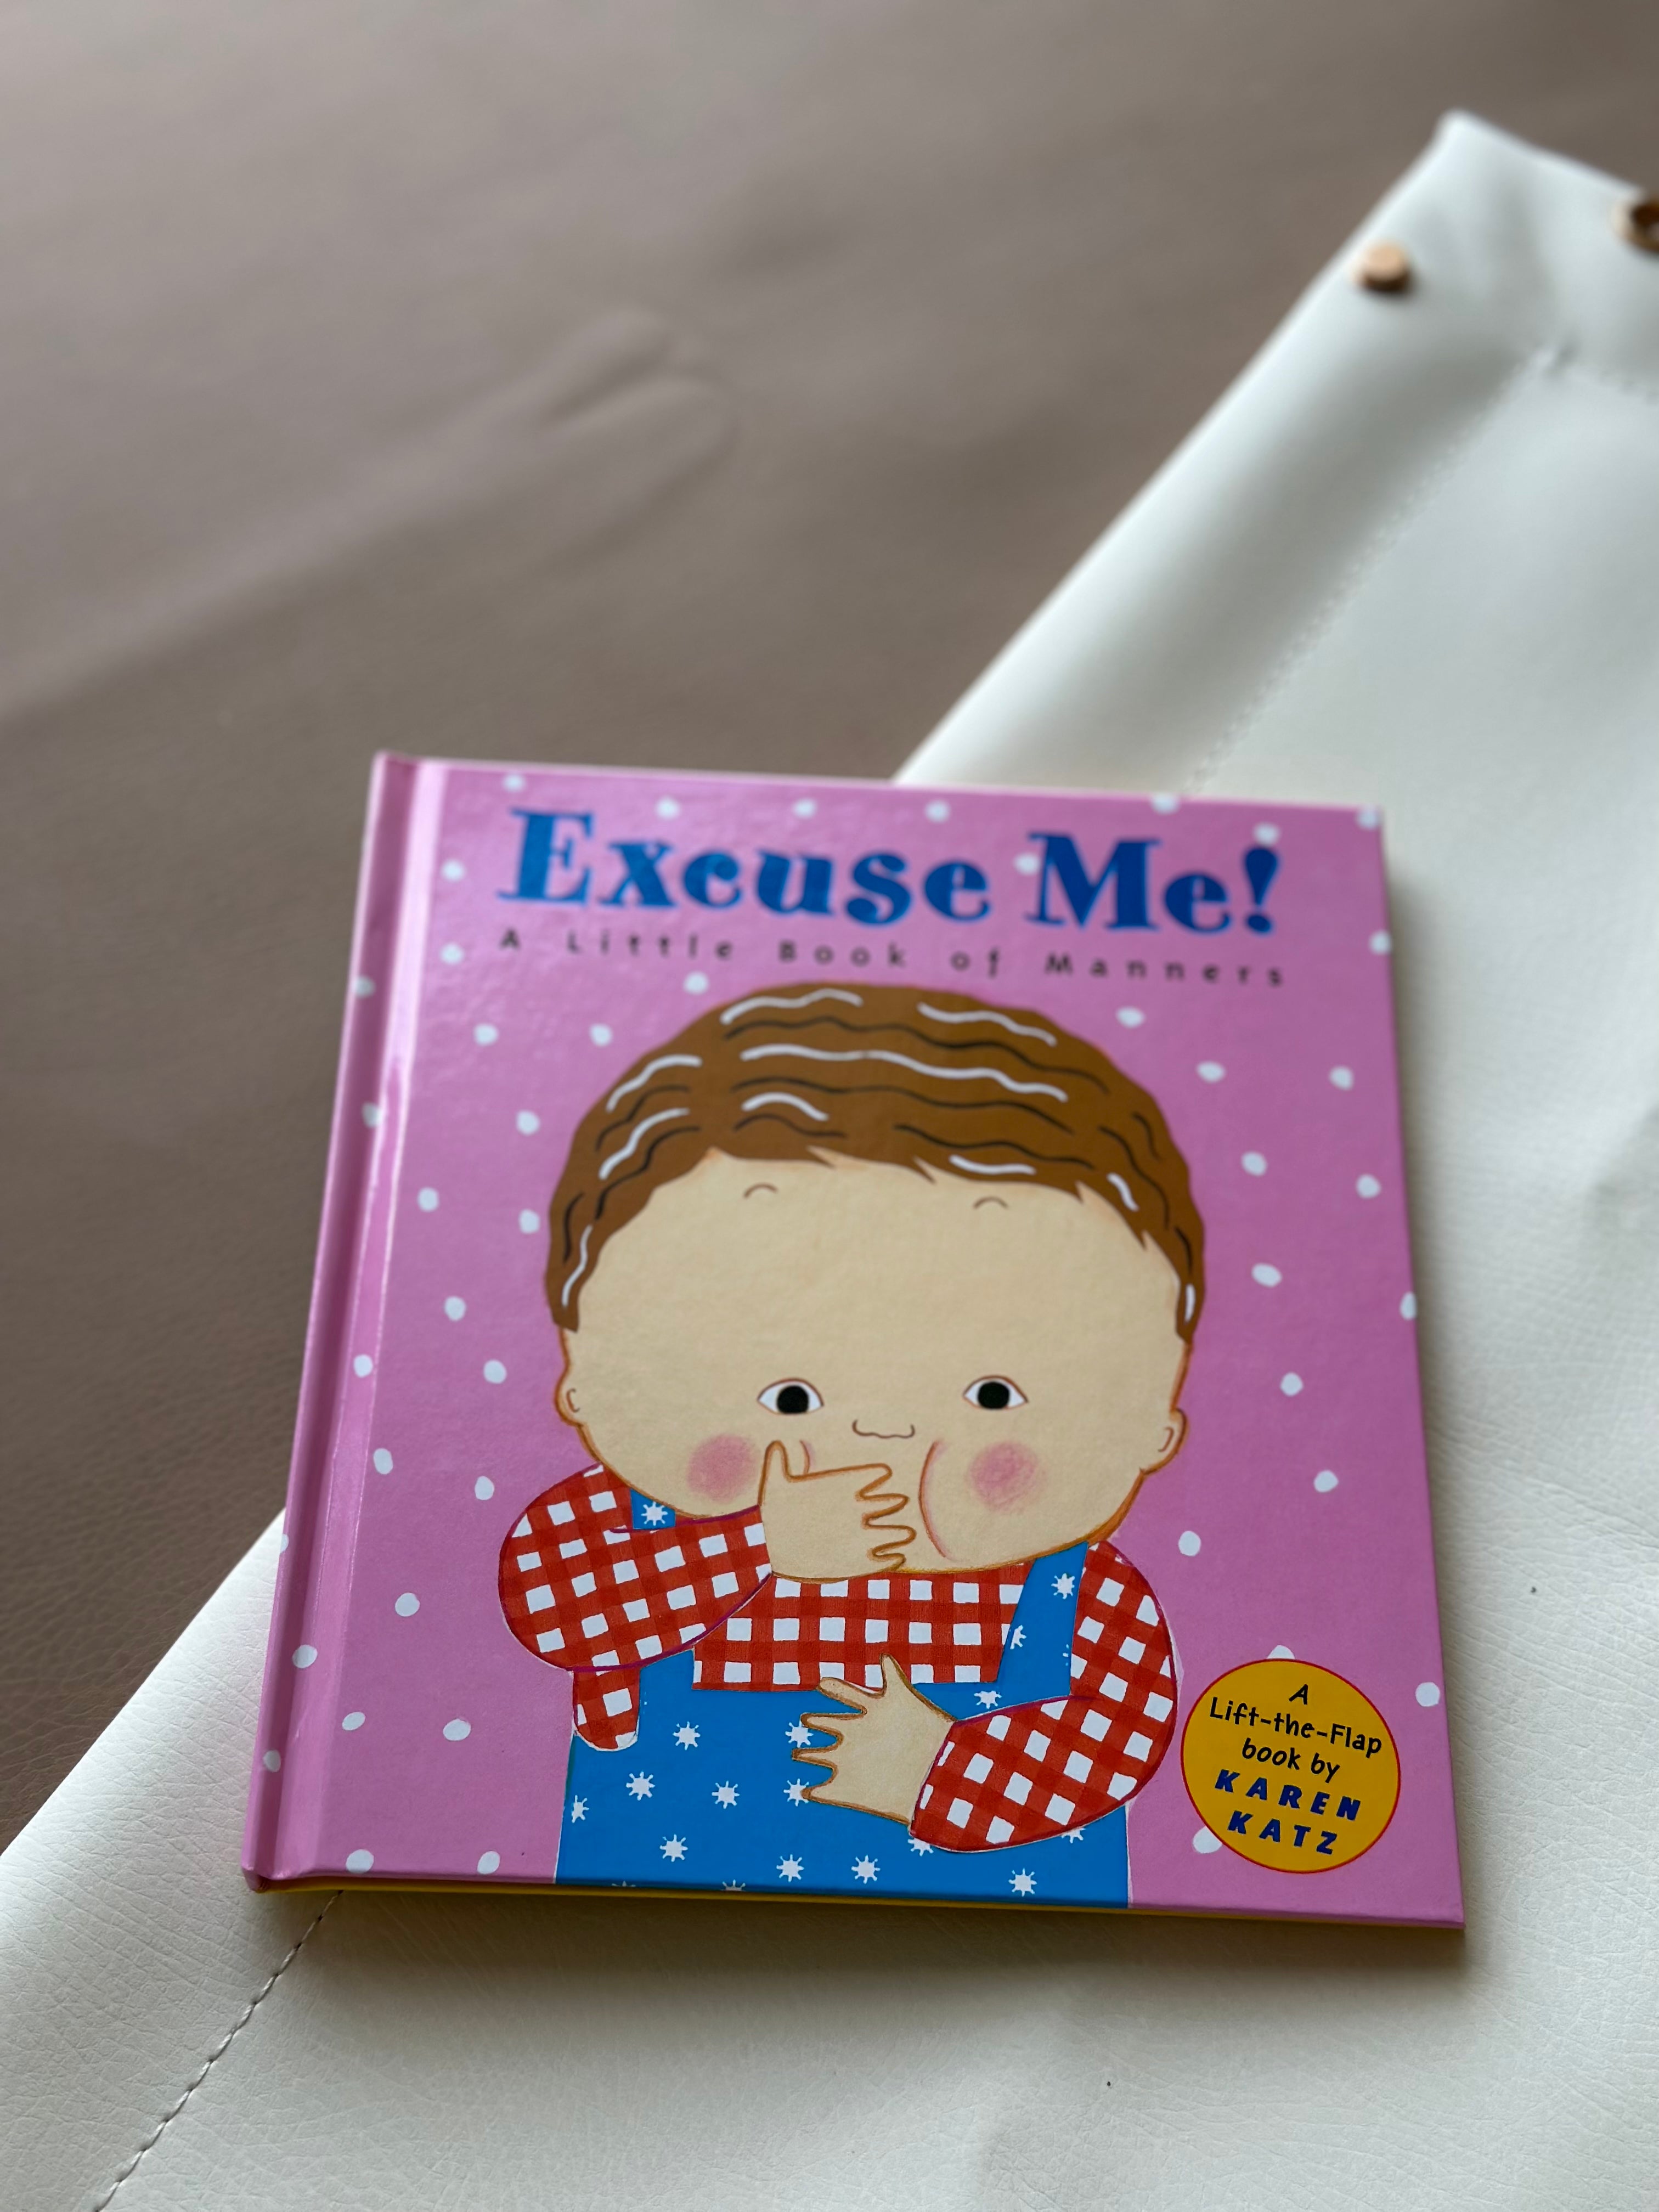 Excuse Me: A Little Book of Manners [Book]